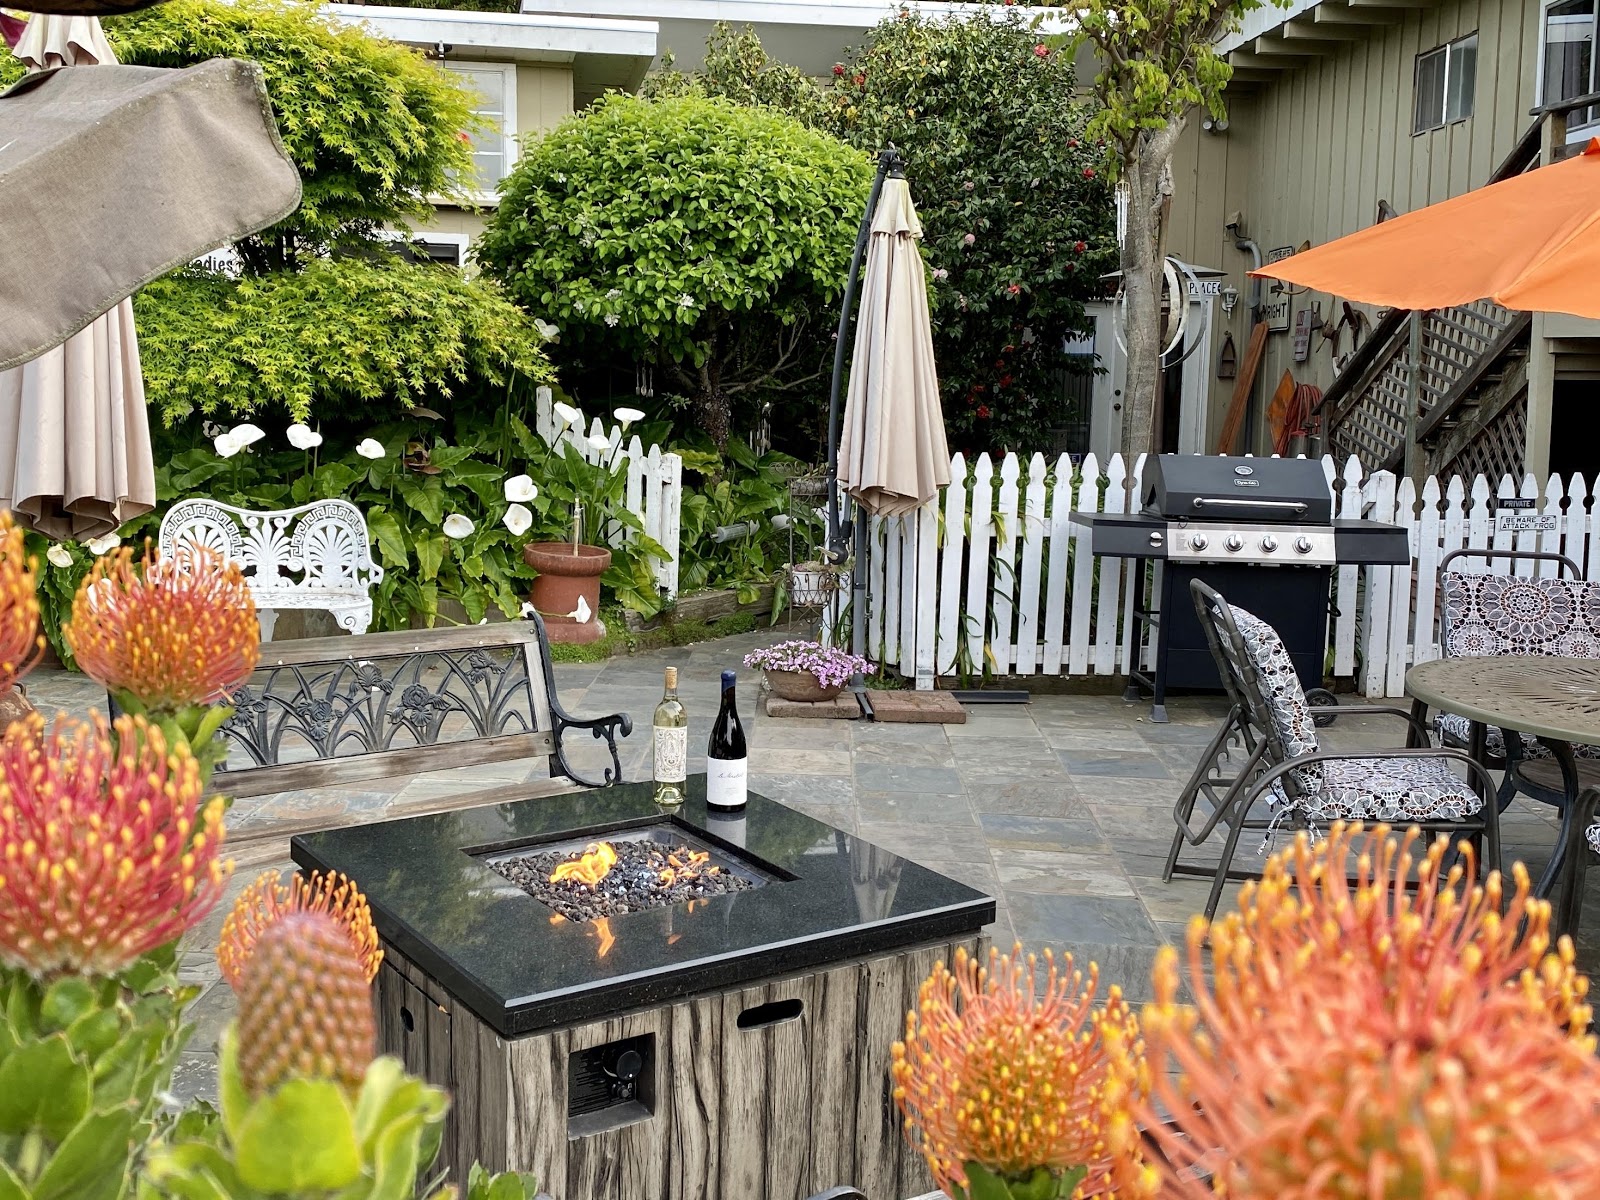 Please feel free to use this peaceful patio during your stay. It is located just outside our office and has BBQs, comfy patio furniture, and a fire pit.